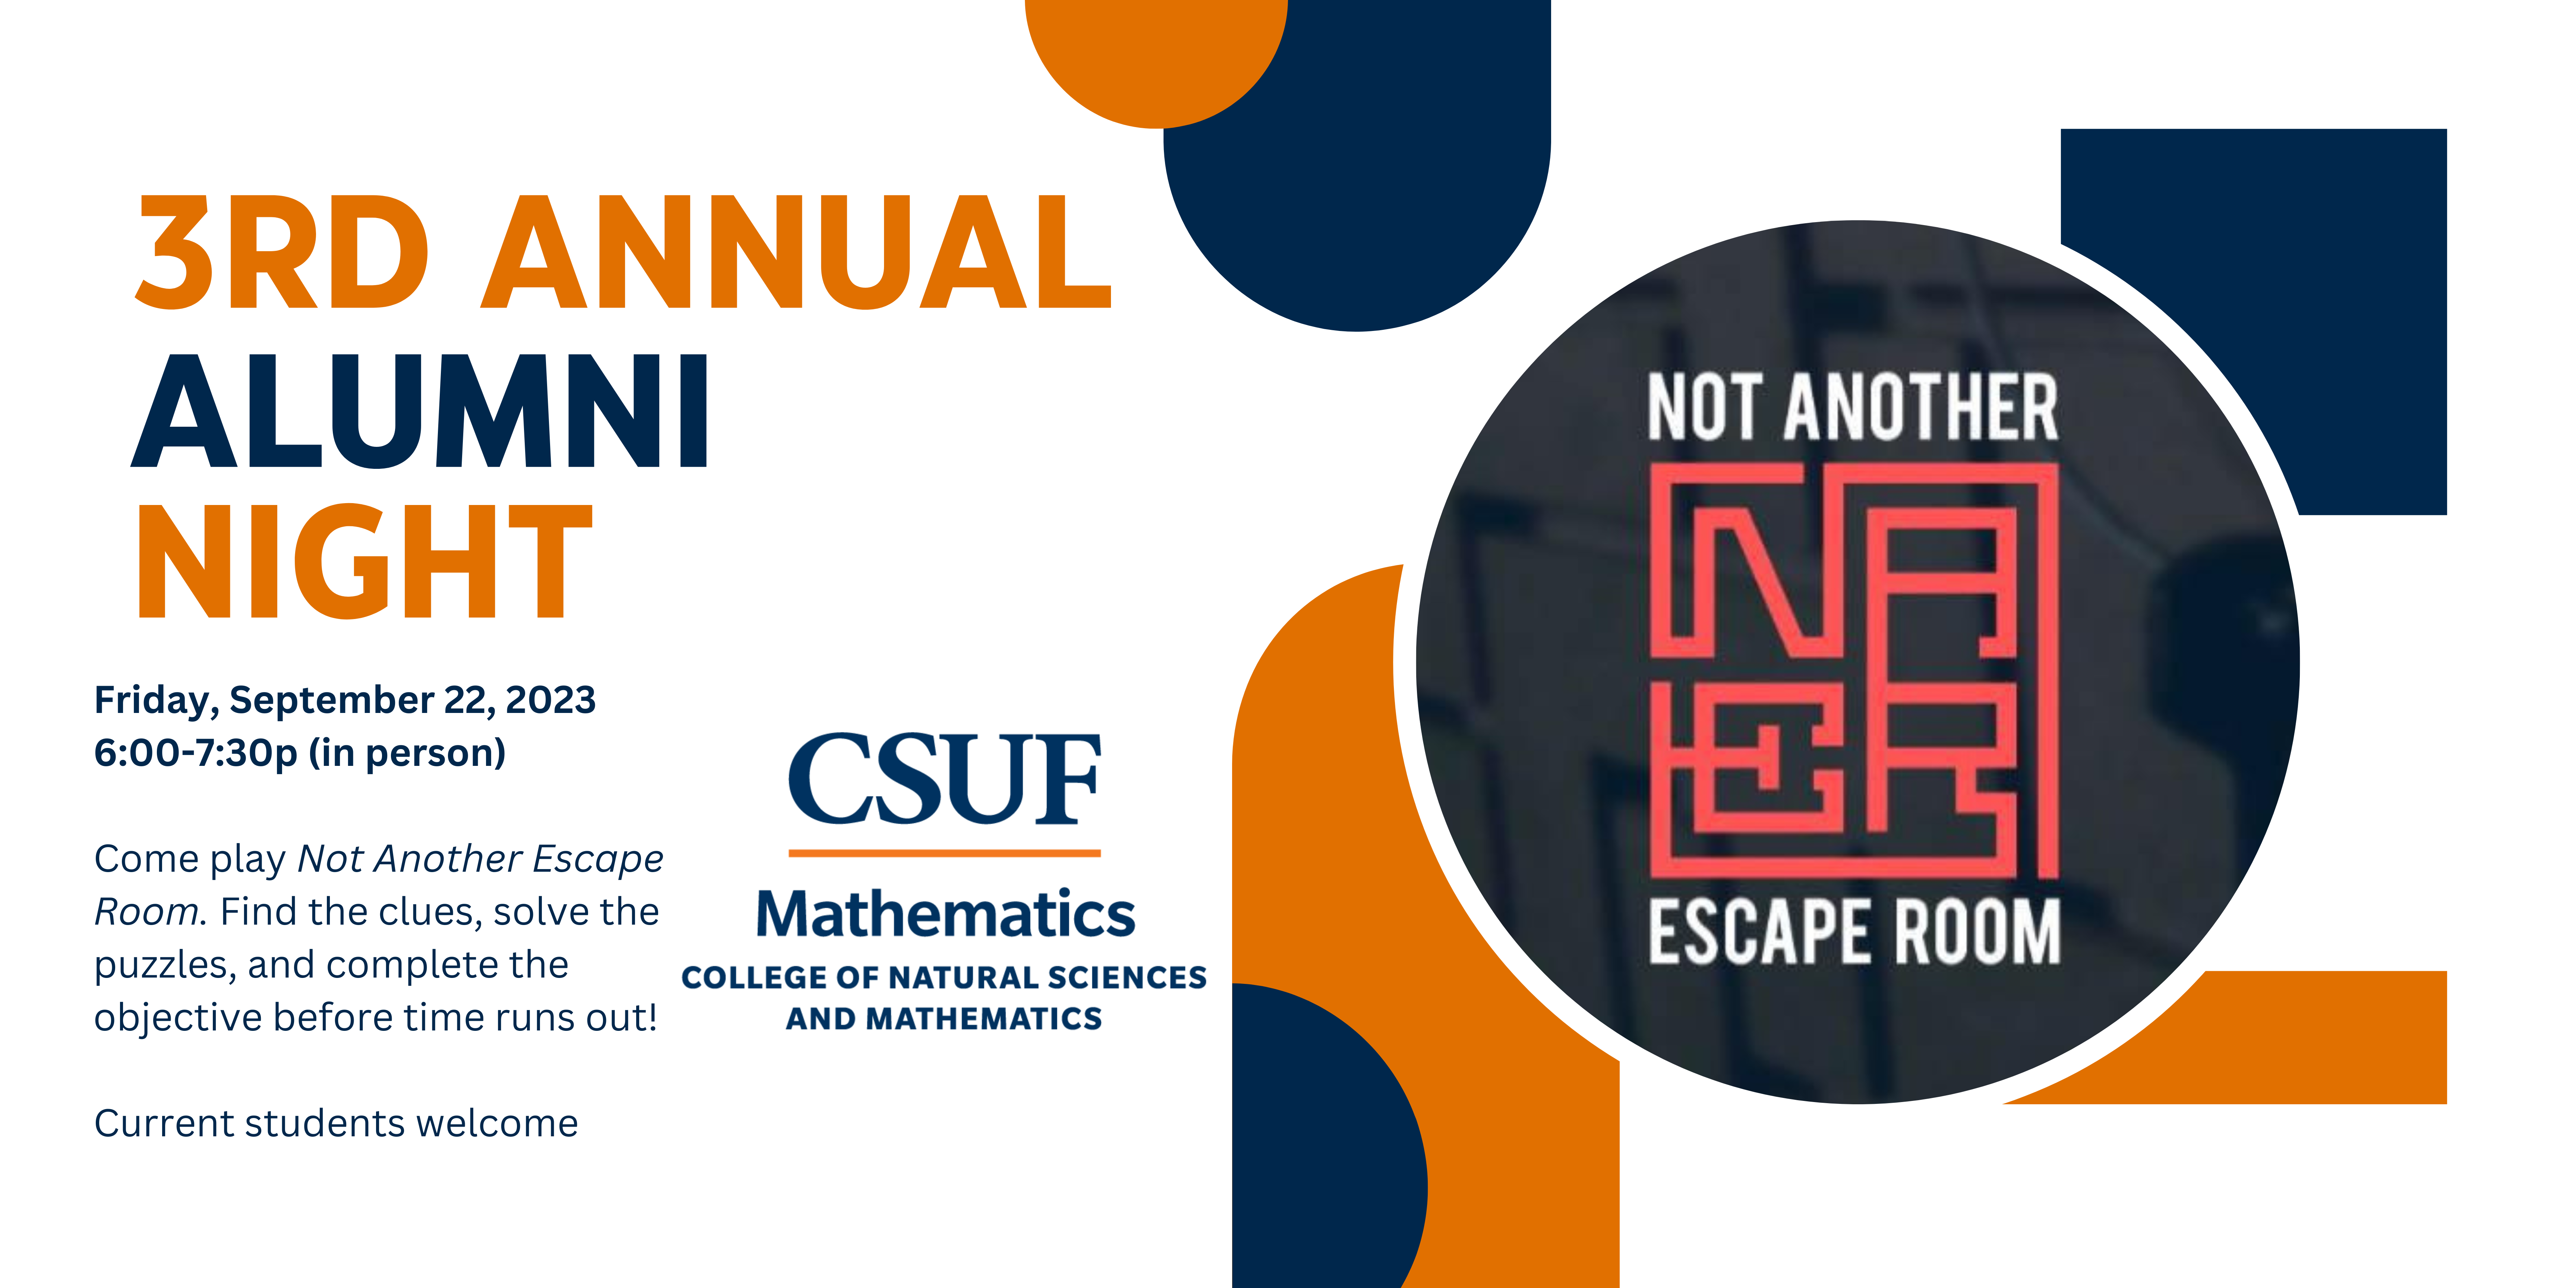 Banner descripting upcoming Alumni event on Friday Sept 22 2023 from 6-7:30p showing Not Another Escape Room logo and Math Department logo.